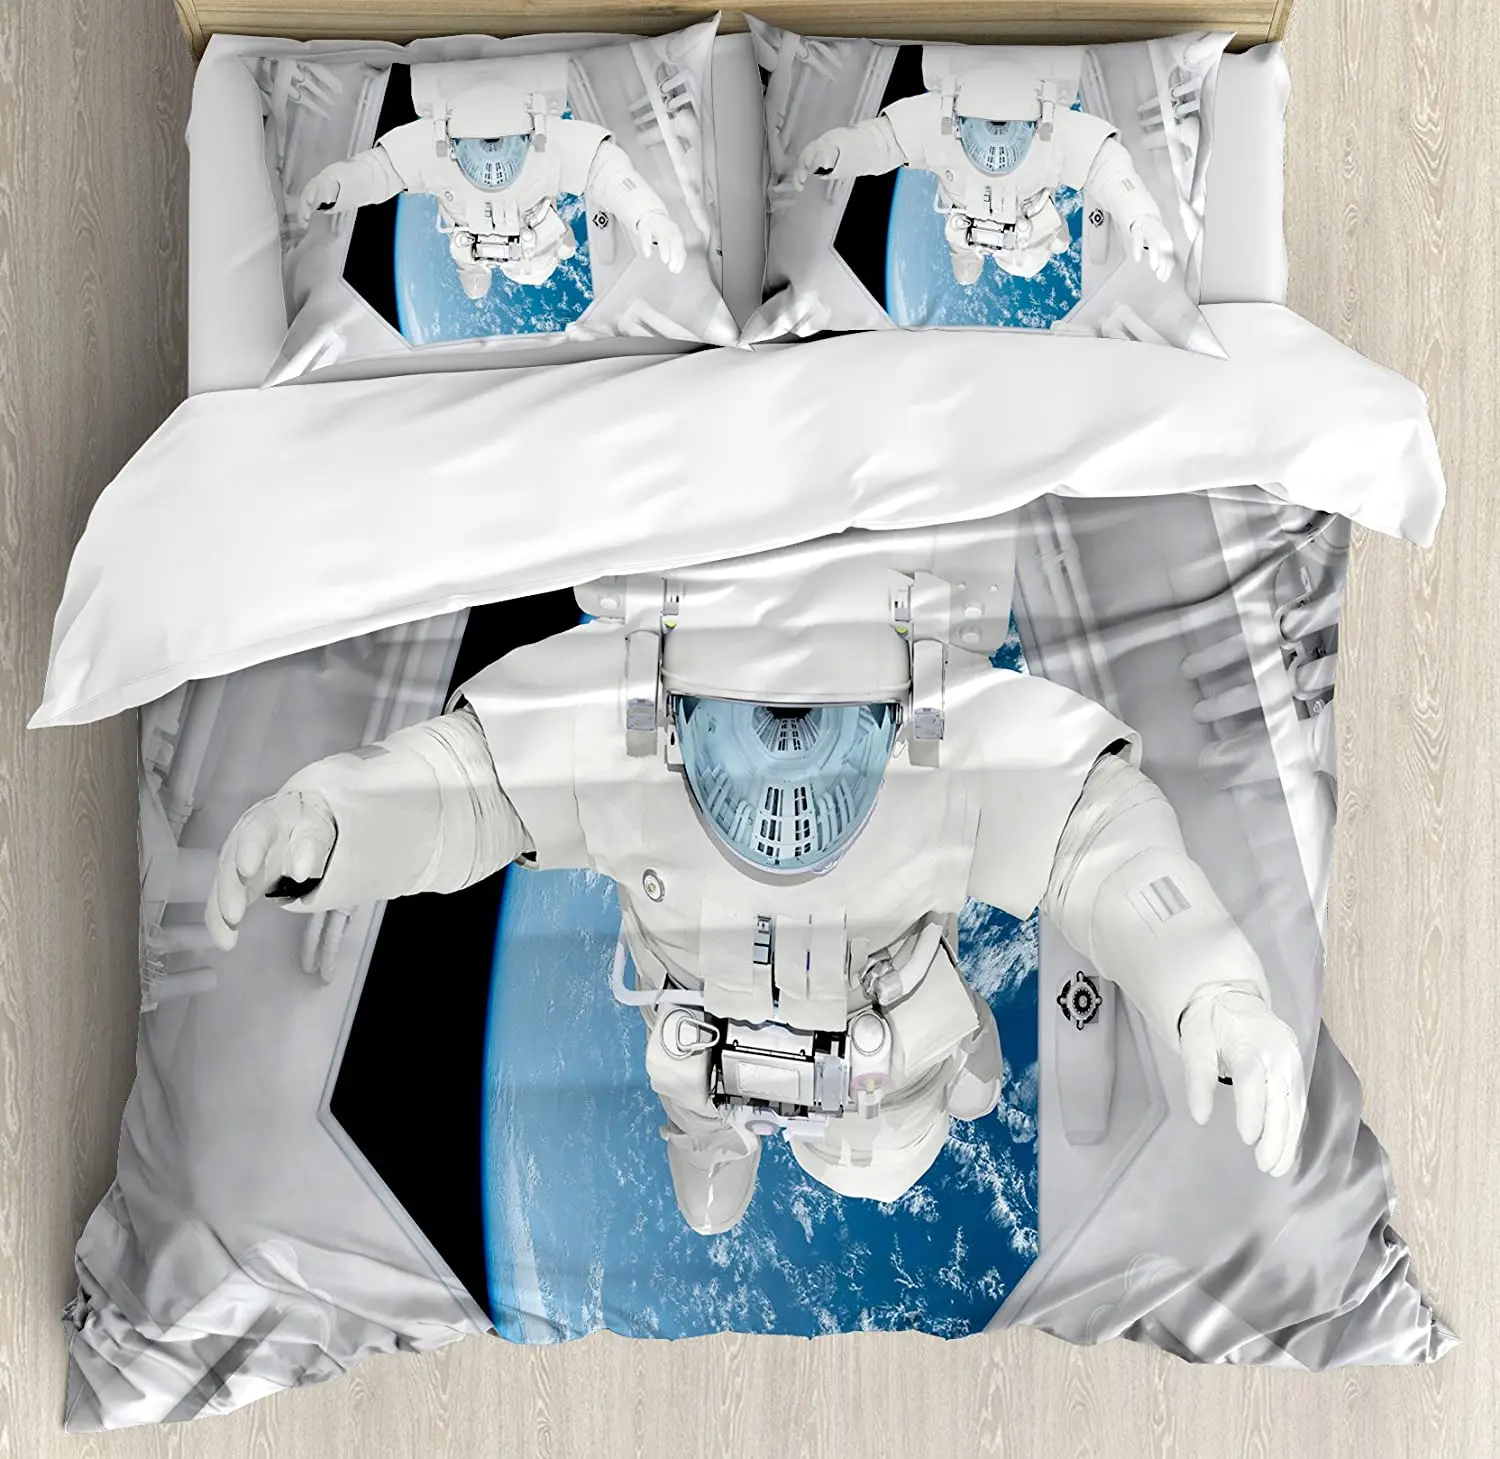 

Outer Space Bedding Set For Bedroom Bed Home Astronaut inside Spaceship Cosmic Journey Cel Duvet Cover Quilt Cover Pillowcase